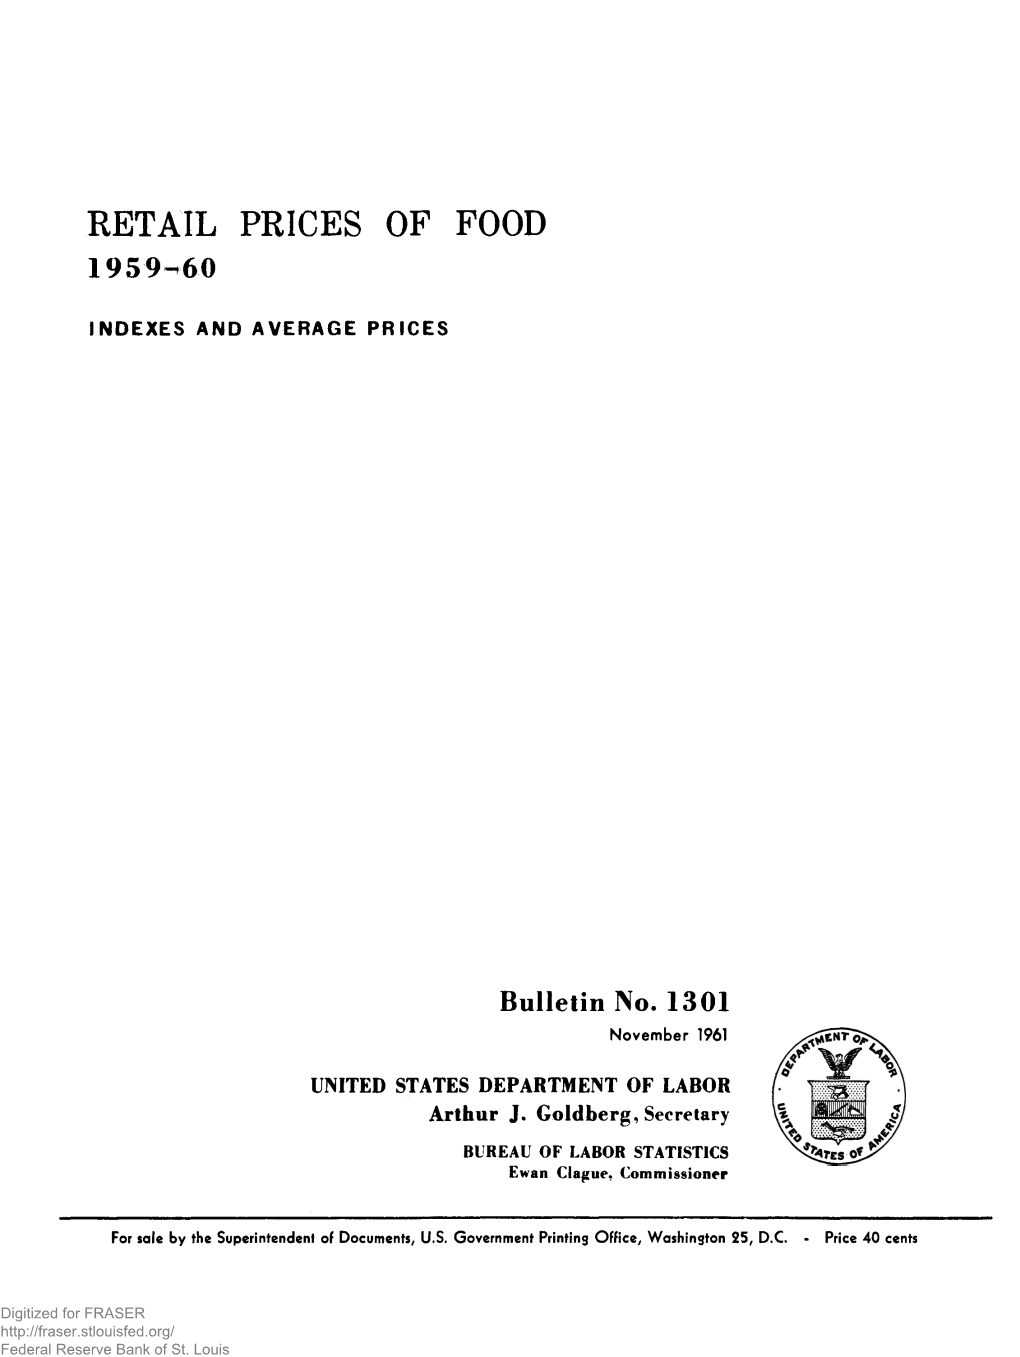 Retail Prices of Food, 1959-60